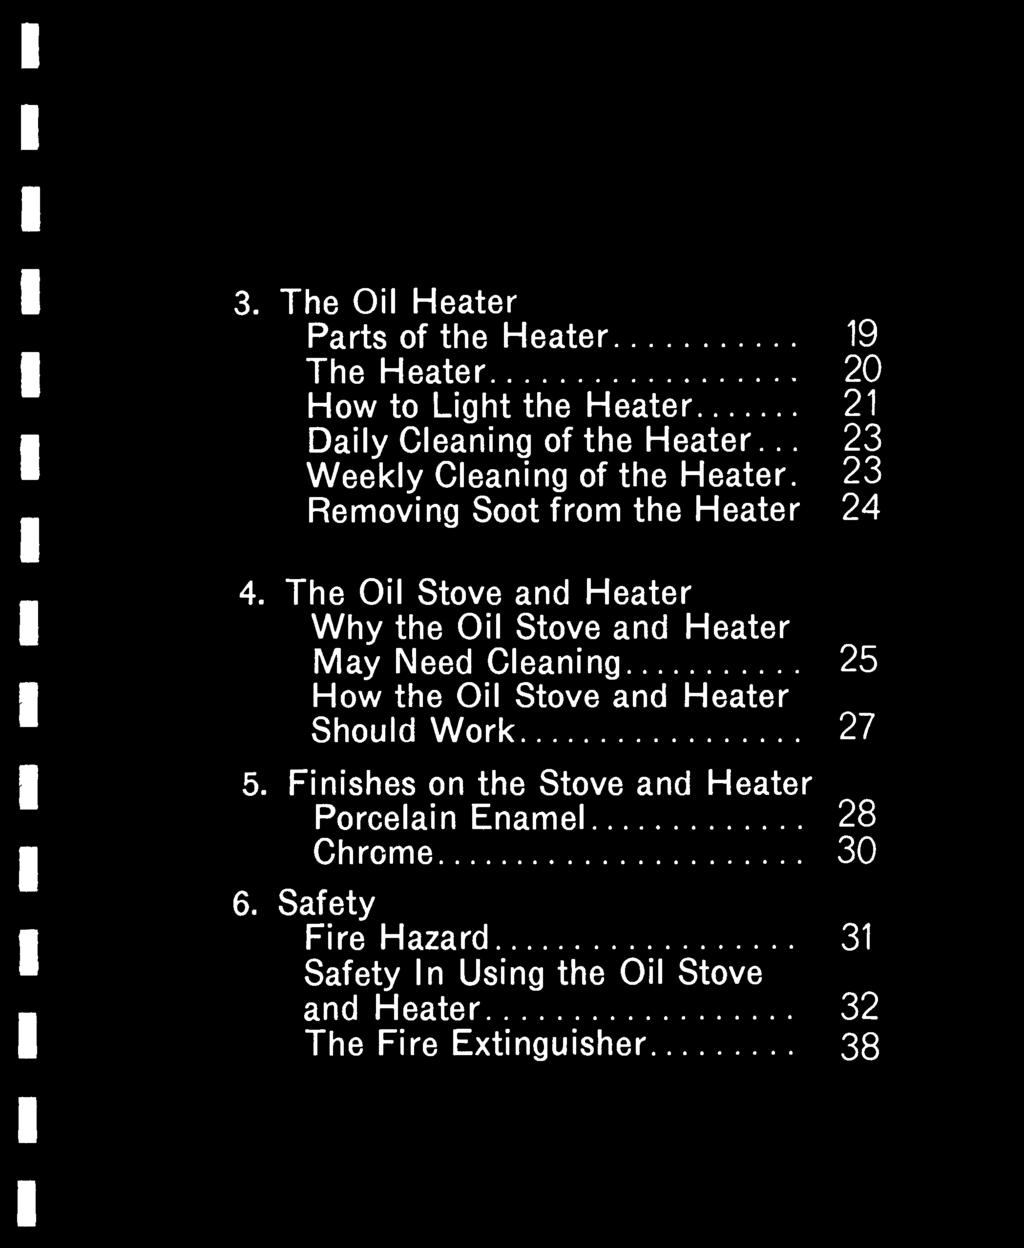 3. The Oil Heater Parts of the Heater 19 The Heater 20 How to Light the Heater 21 Daily Cleaning of the Heater... 23 Weekly Cleaning of the Heater. 23 Removing Soot from the Heater 24 4.